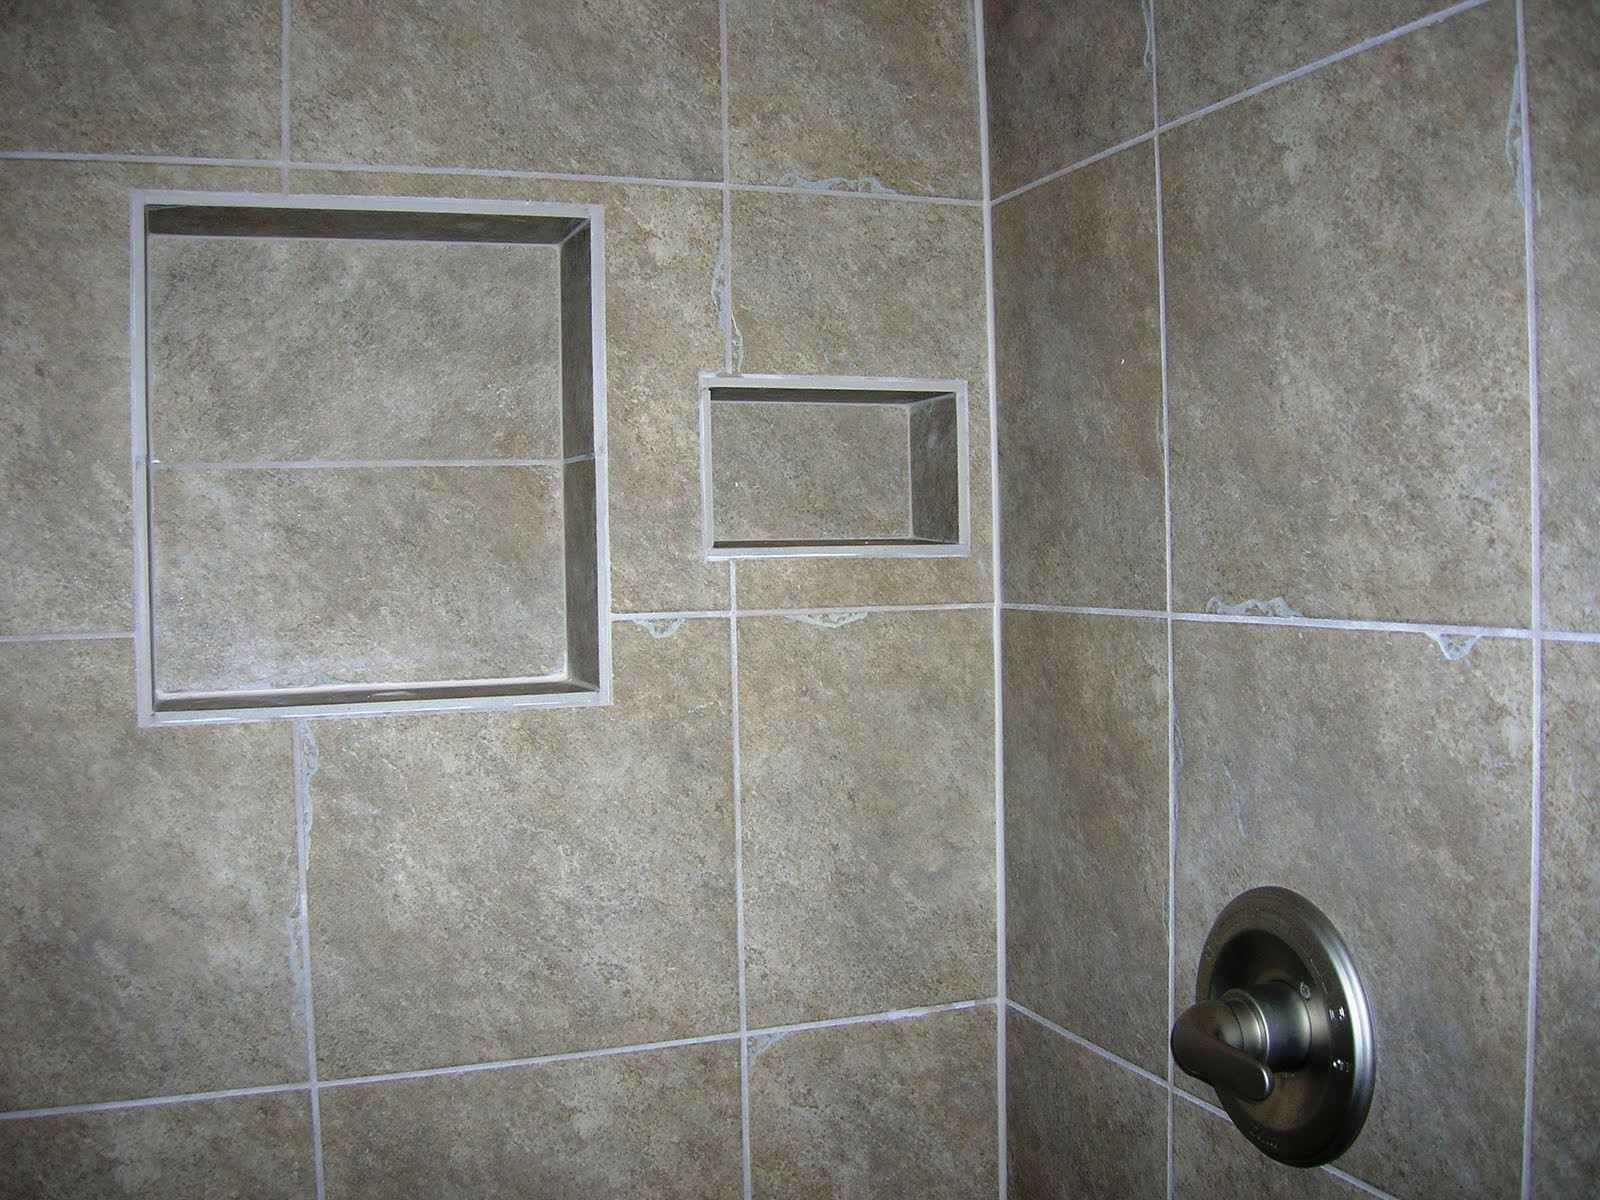 Bathroom Tile Patterns Shower
 30 nice pictures and ideas of modern bathroom wall tile